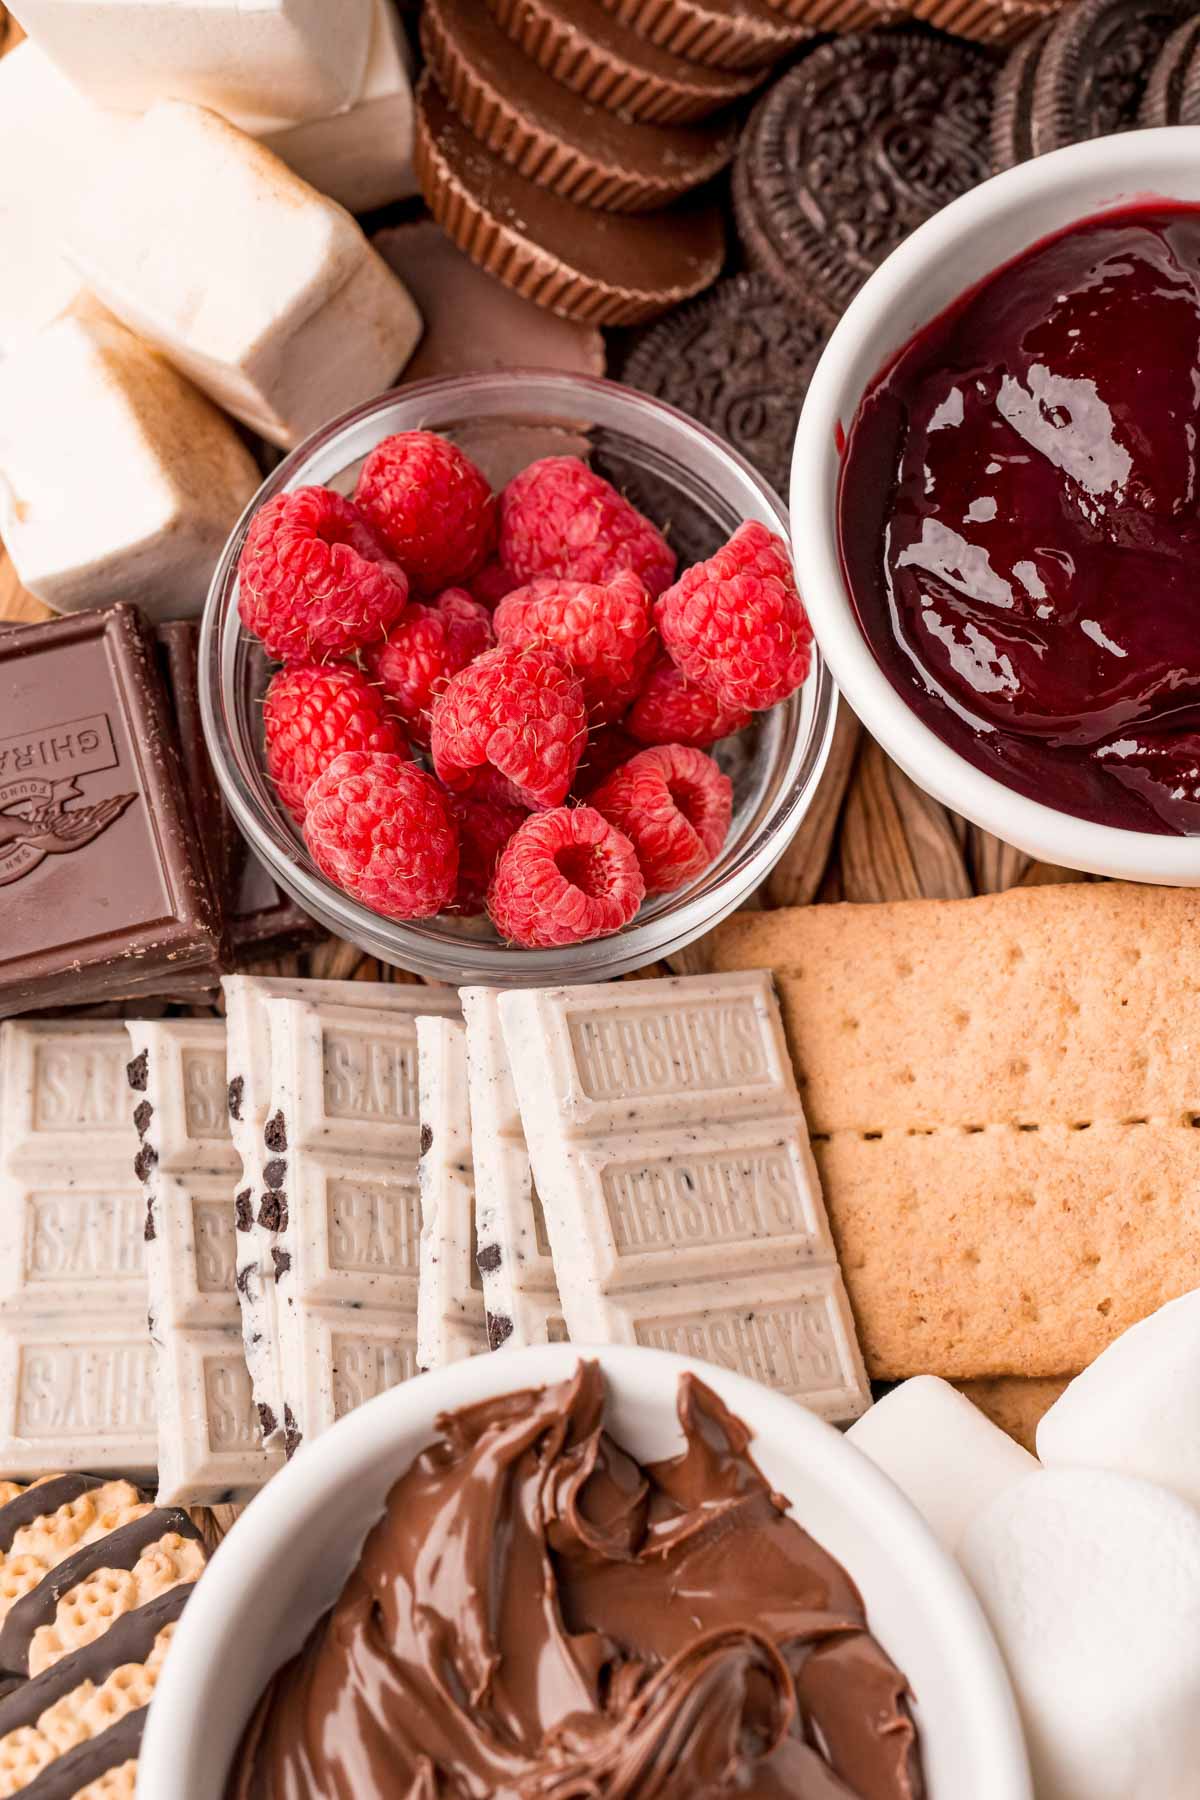 s'more board with raspberries